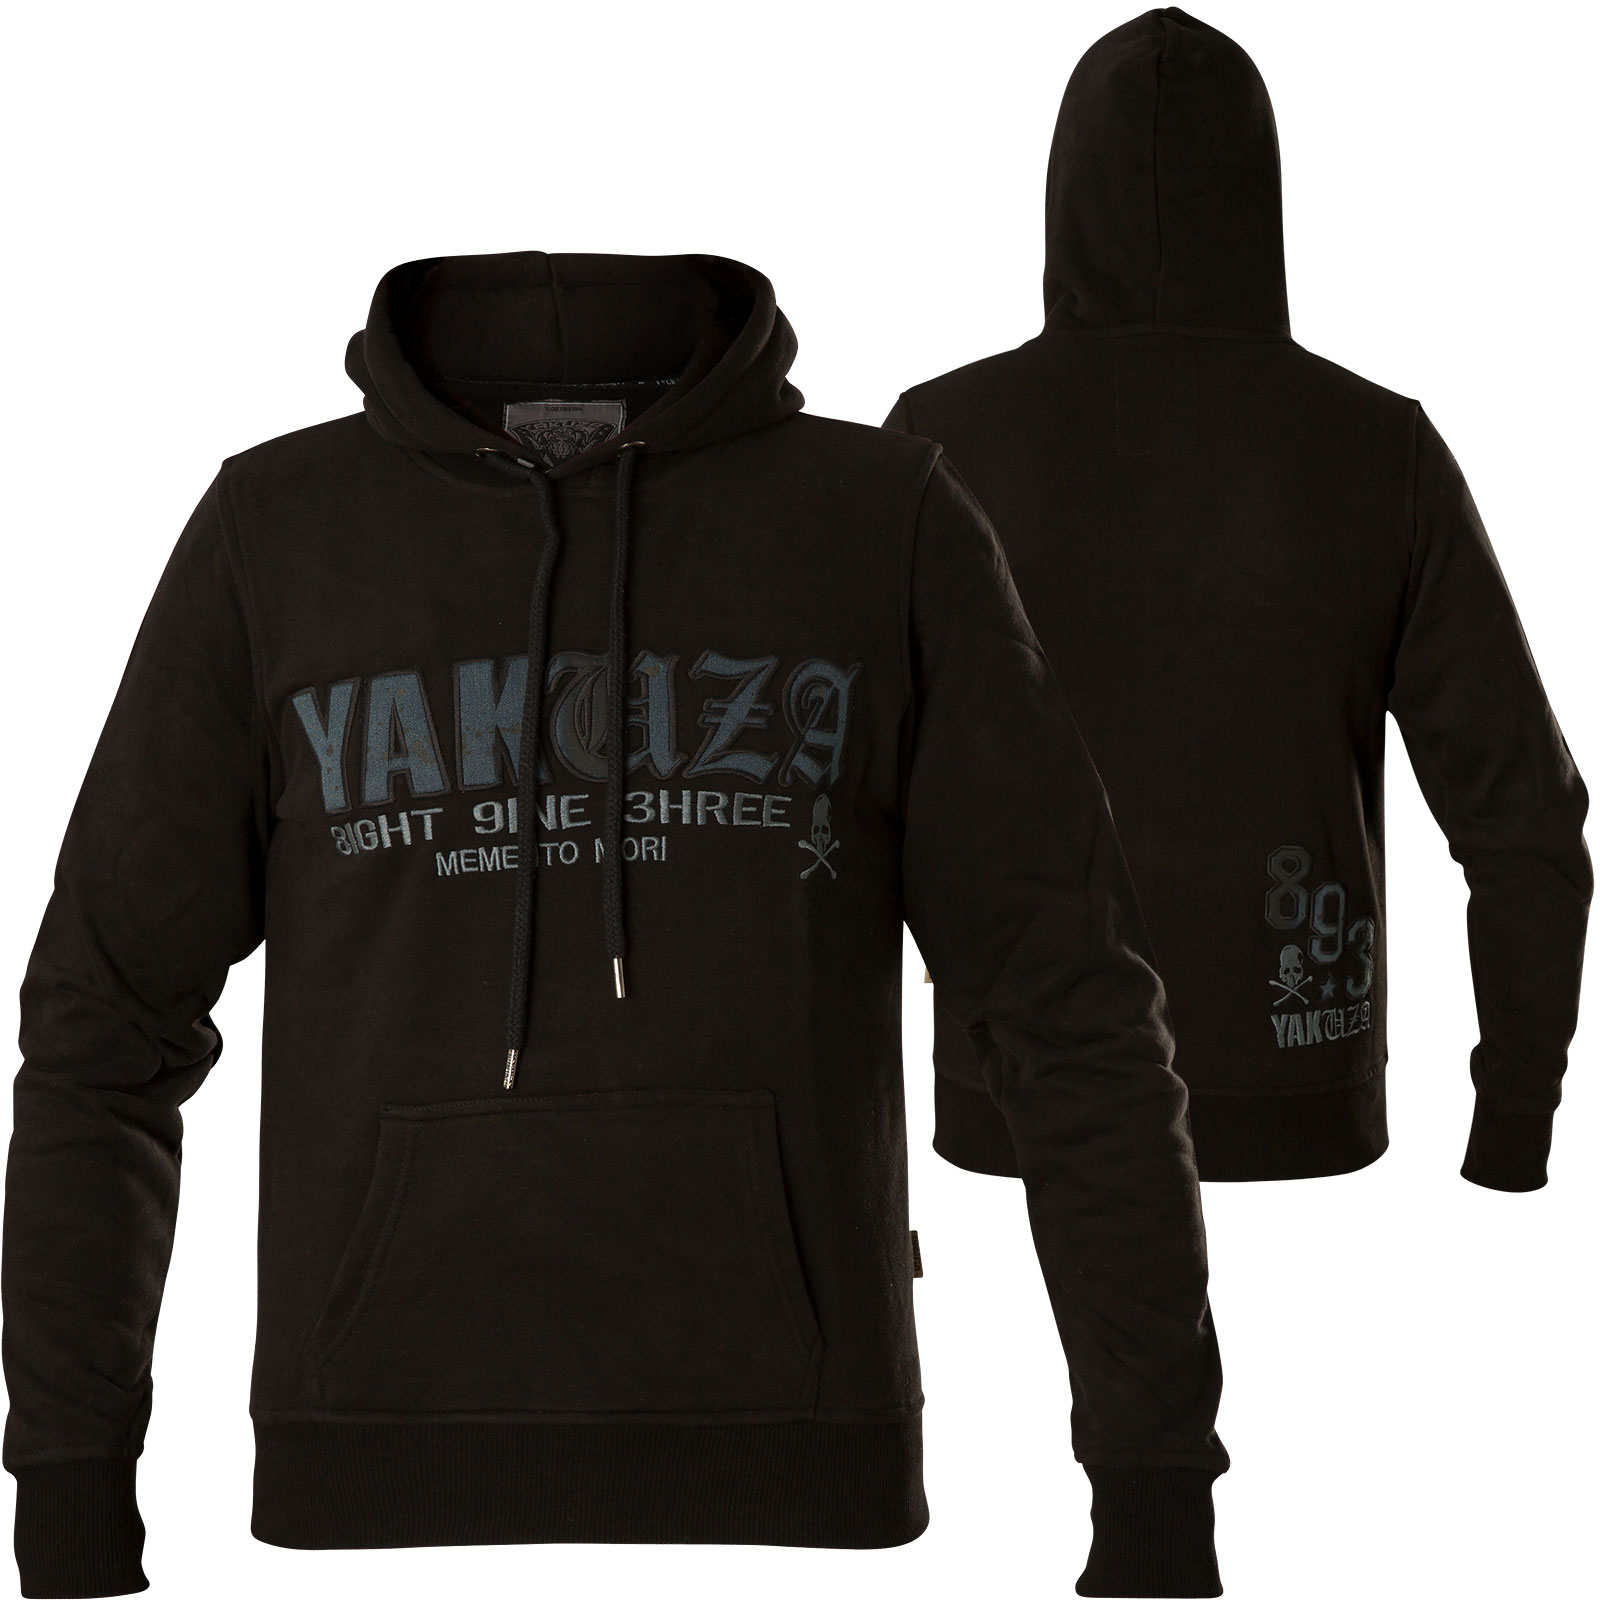 Yakuza Denim Logo Hoodie HOB-13053 with patches and lettering